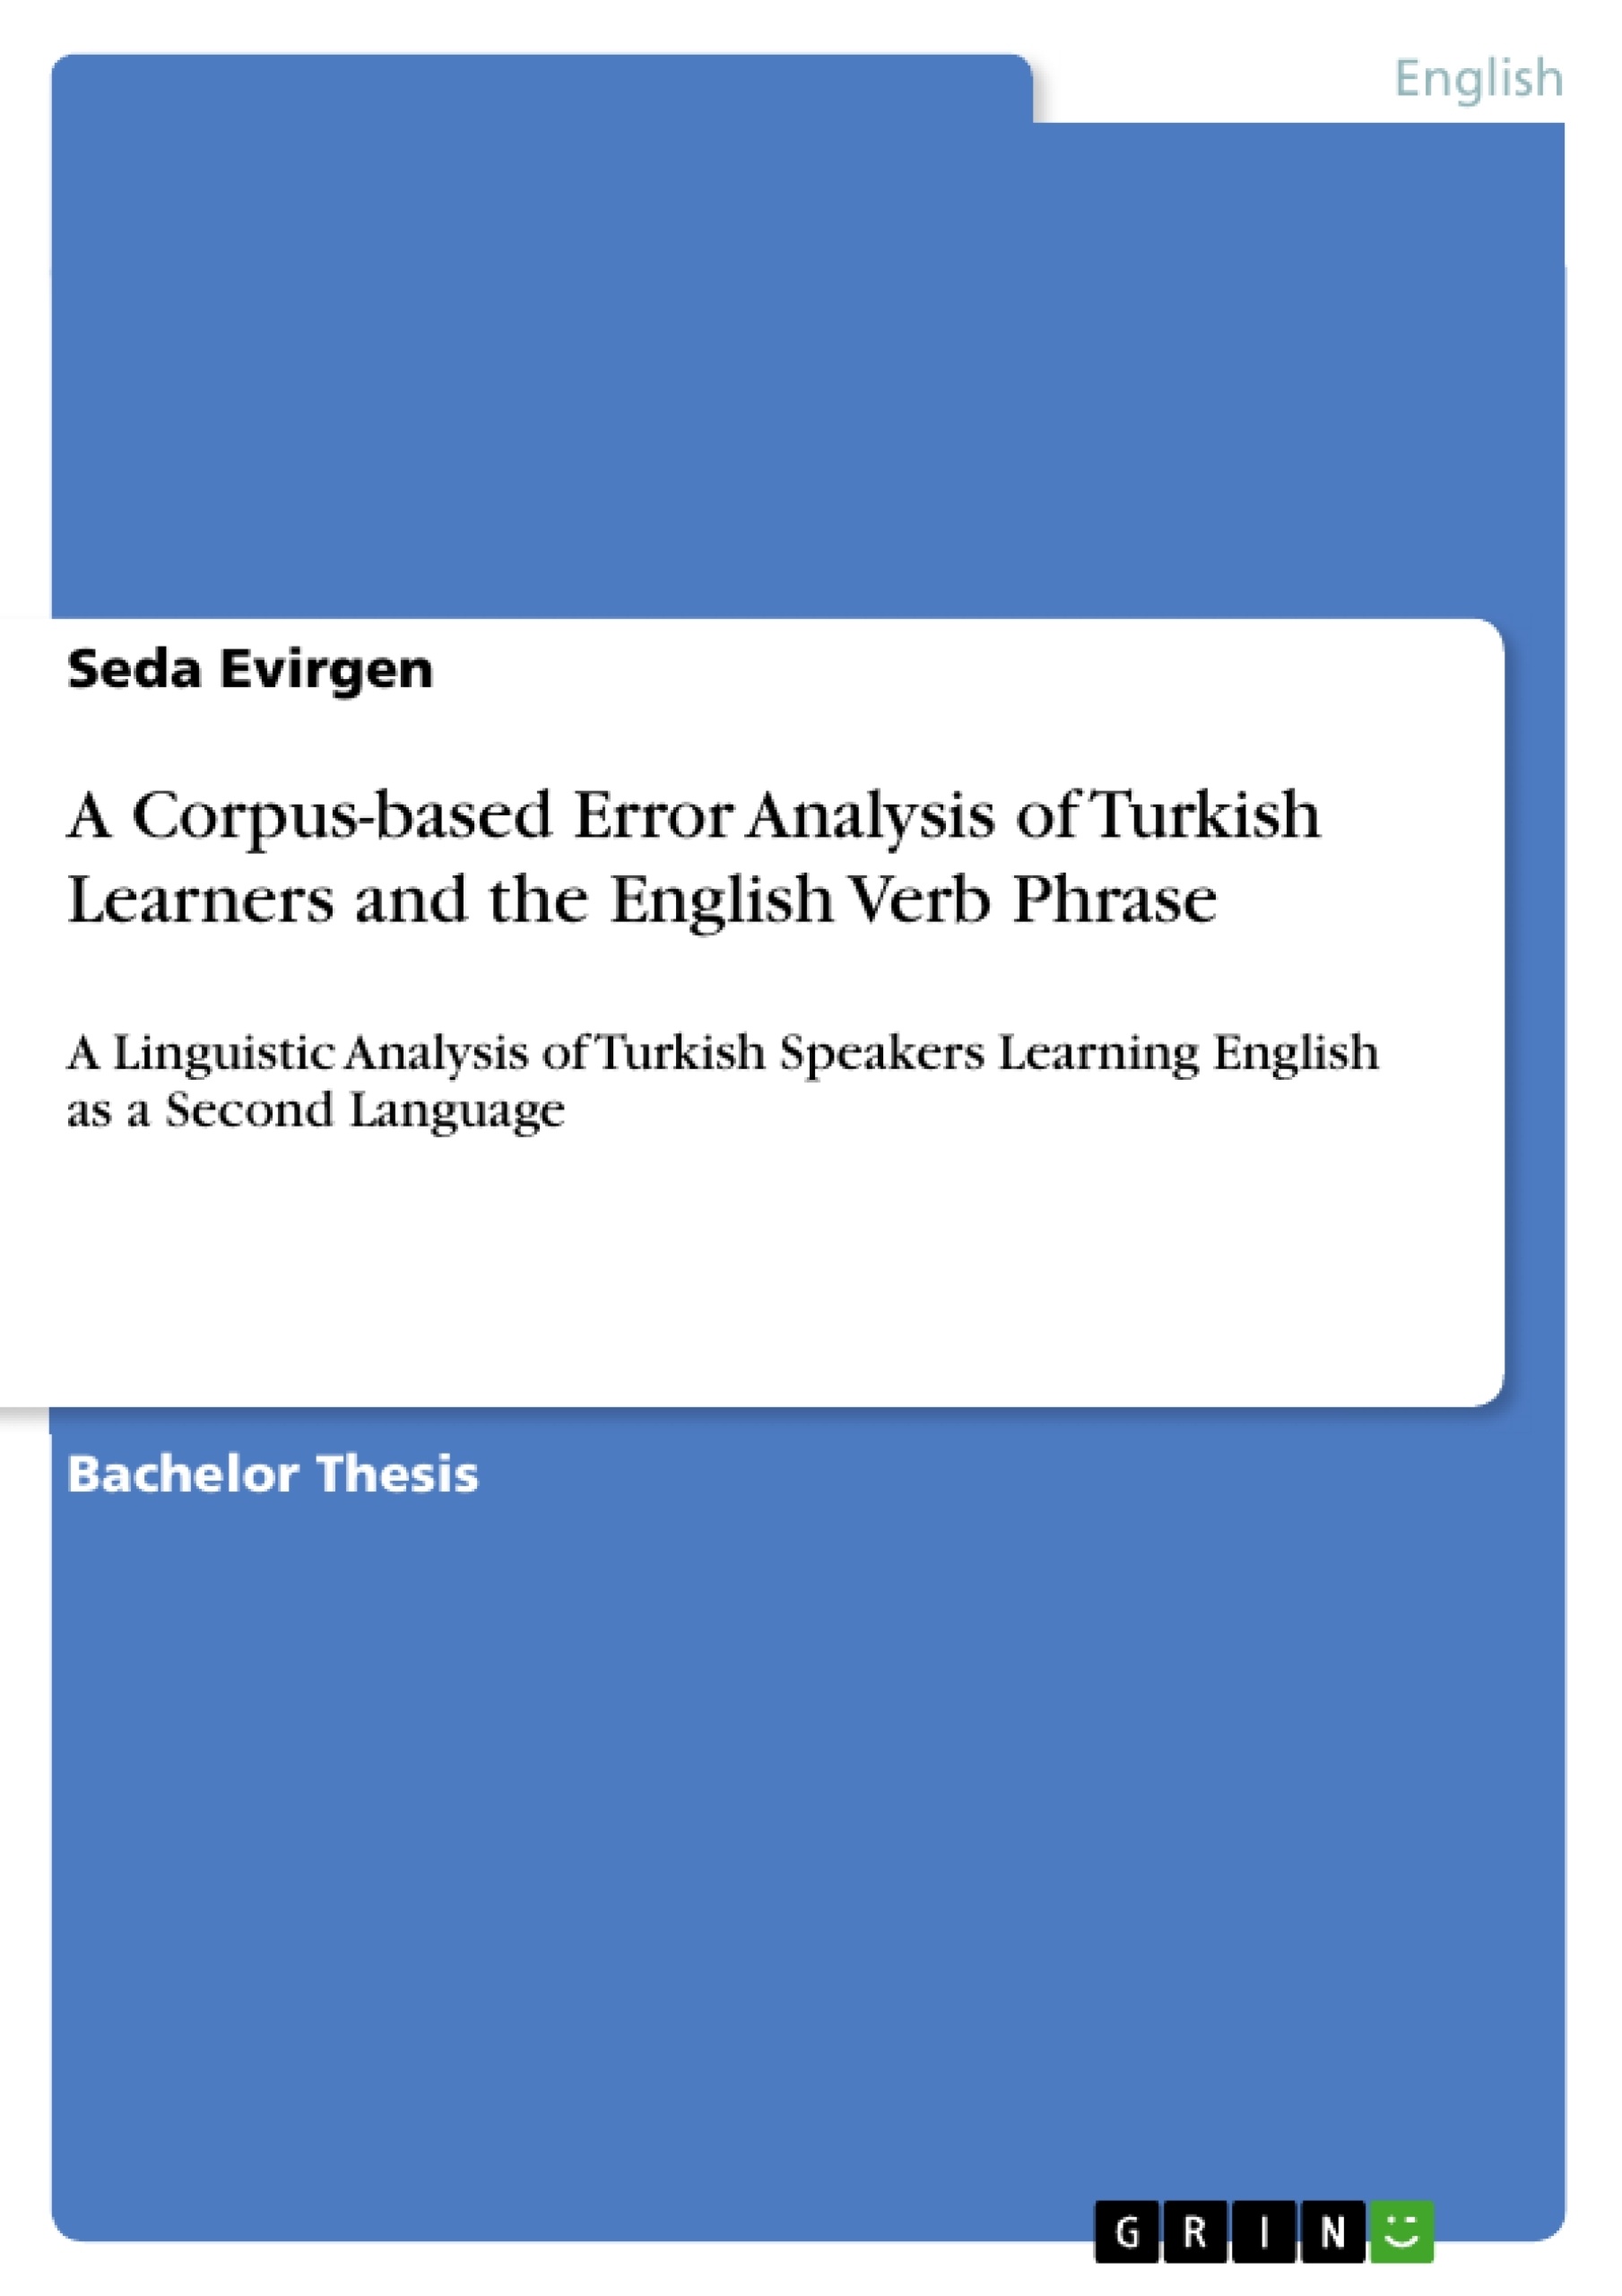 Titre: A Corpus-based Error Analysis of Turkish Learners and the English Verb Phrase